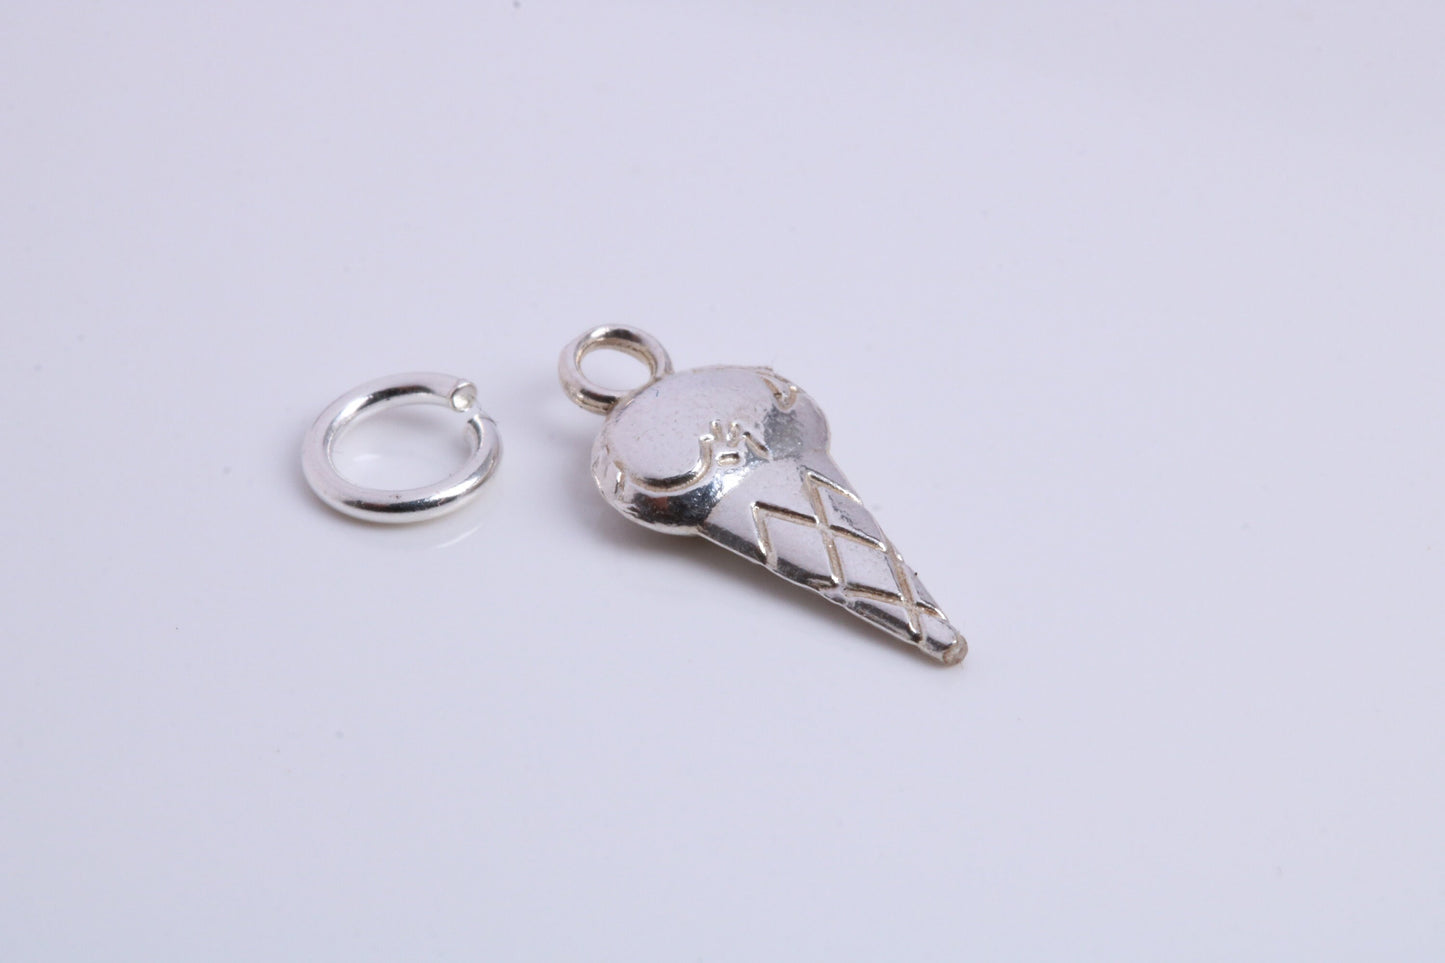 Ice Cream Cone Charm, Traditional Charm, Made from Solid 925 Grade Sterling Silver, Complete with Attachment Link